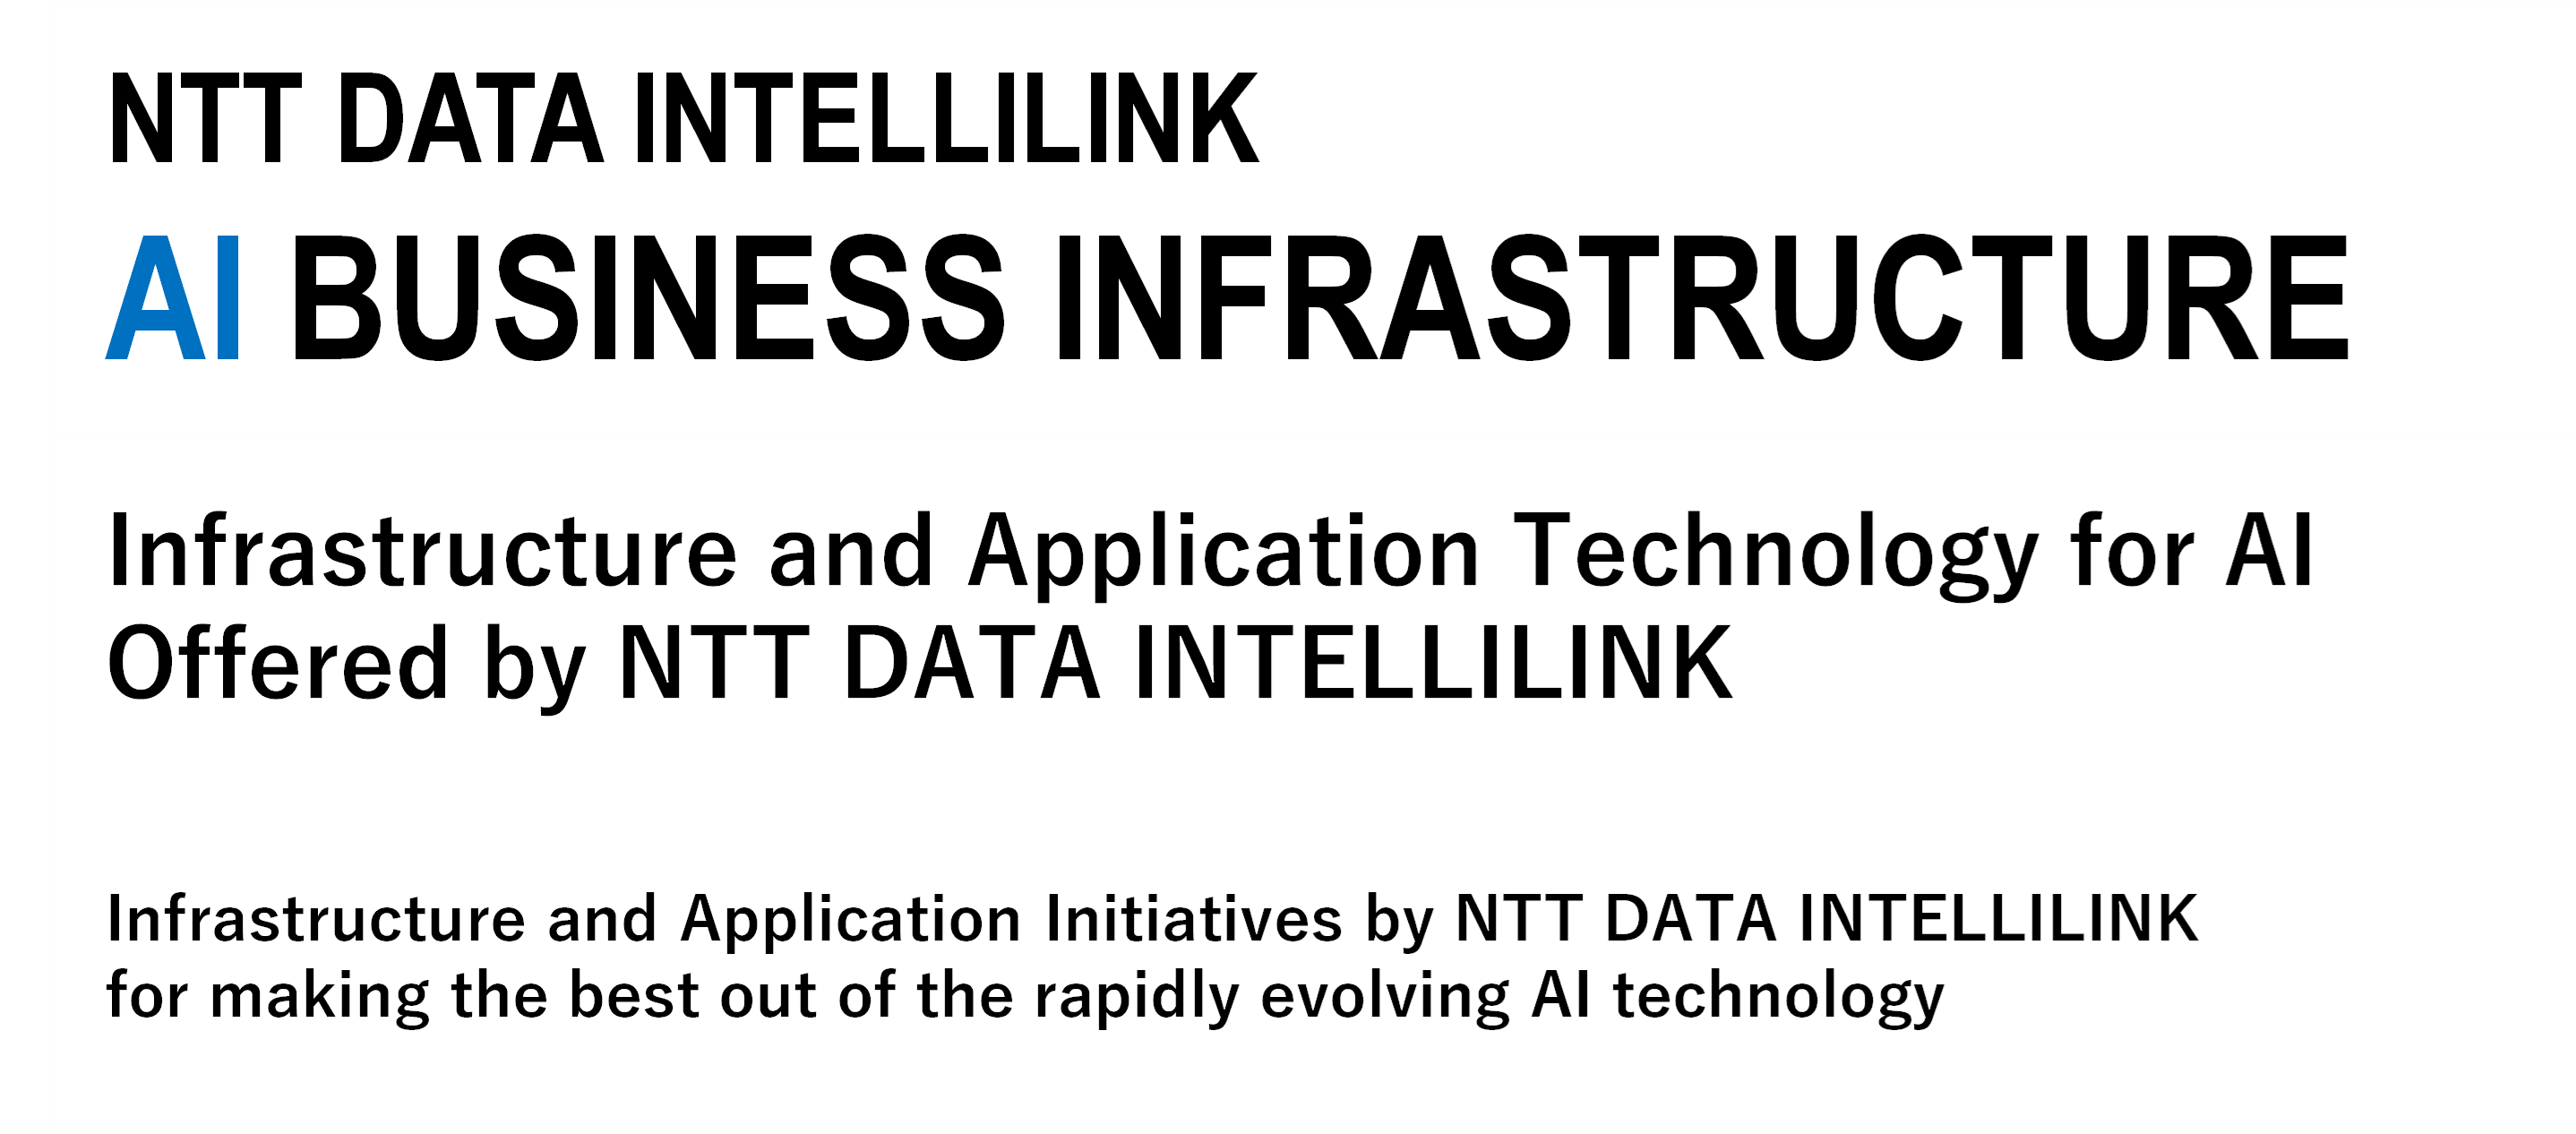 NTT  DATA INTELLILINK AI  BUSINESS INFRASTRUCTURE NTT DATA INTELLILINK's infrastructure technology for AI utilization How should the infrastructure and application for utilizing AI, which continues to evolve at a rapid pace, be developed?Here are the initiatives taken by NTT DATA INTELLILINK.